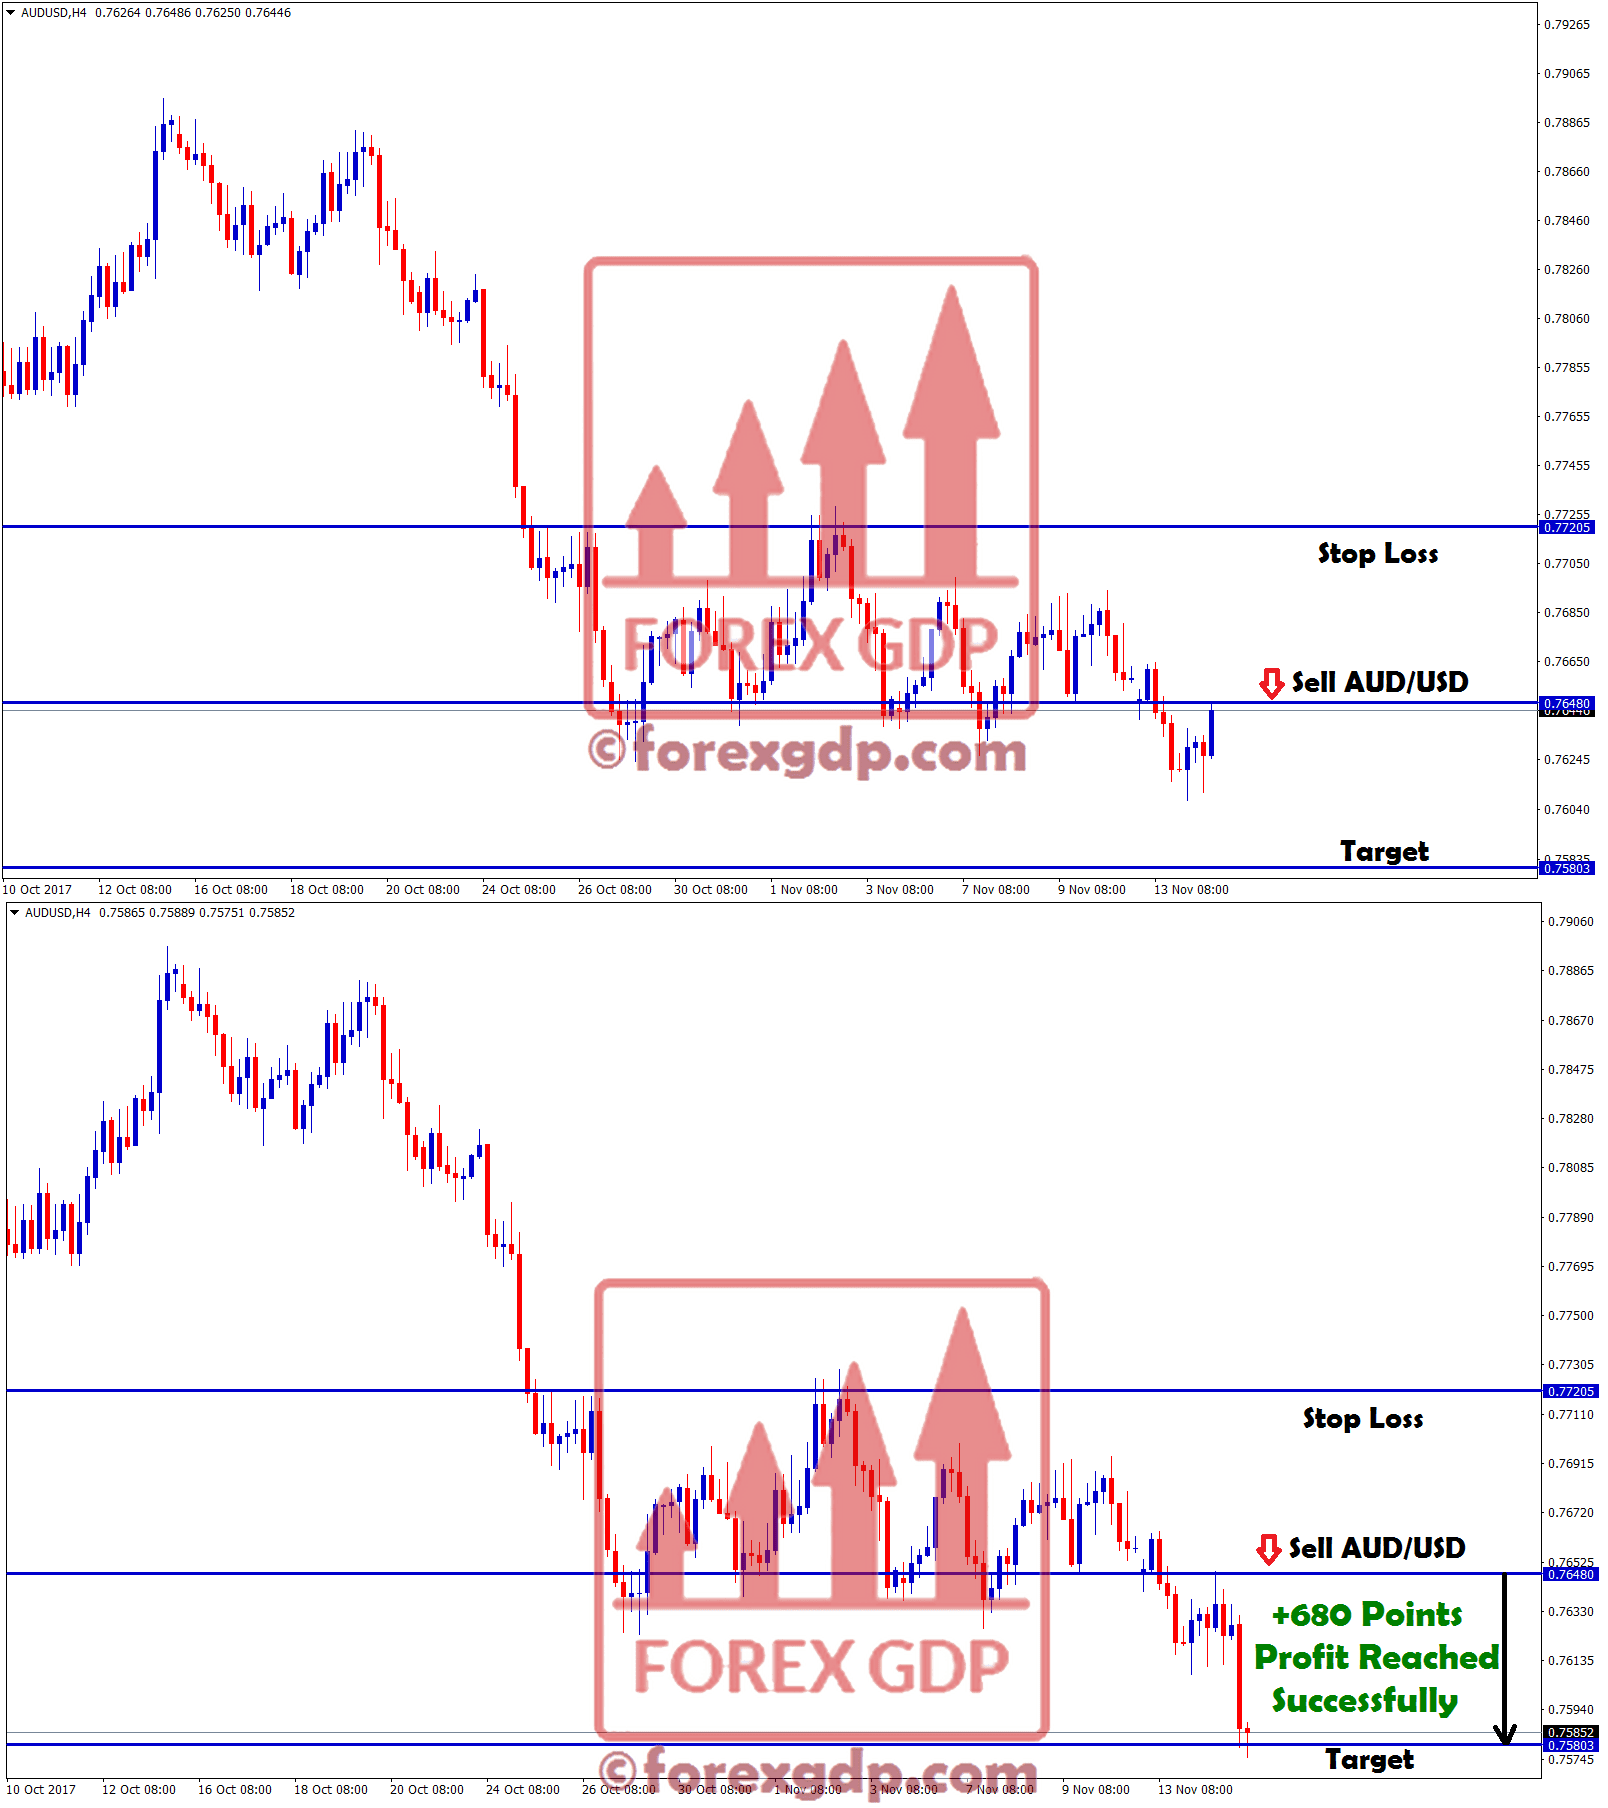 Sell AUDUSD trade hits 680 points proift